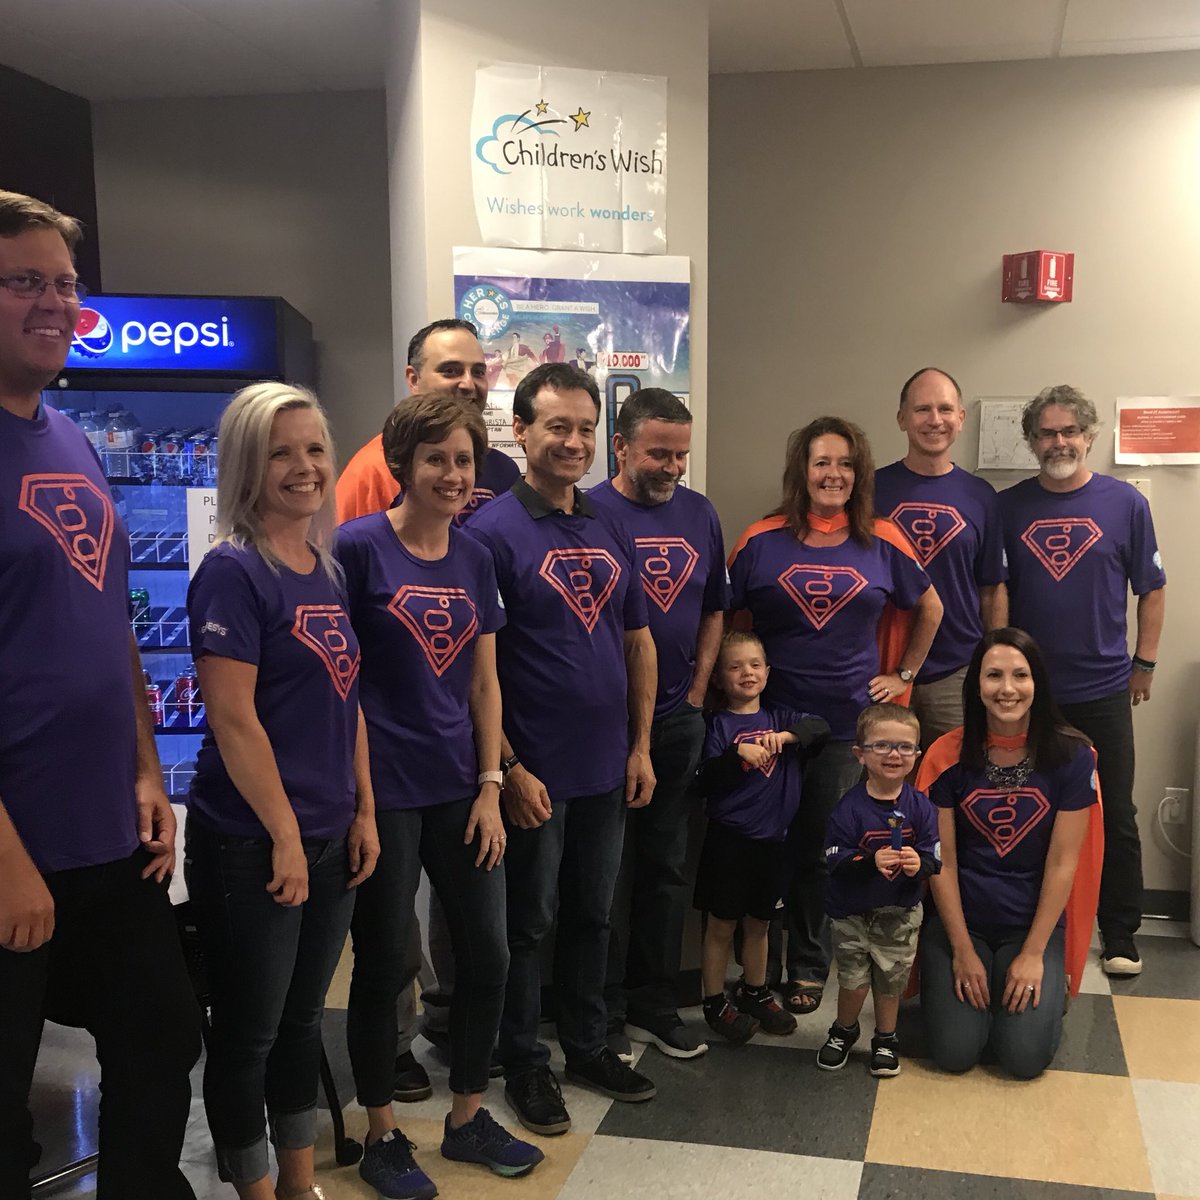 @Genesys SJO Team G-Force and our @ChildrensWishNB wish child Will and big bro Jake had an #icecream party today!! #superheroeschallenge Sept 21 in #YSJ #wishesworkwonders #sodoesicecream